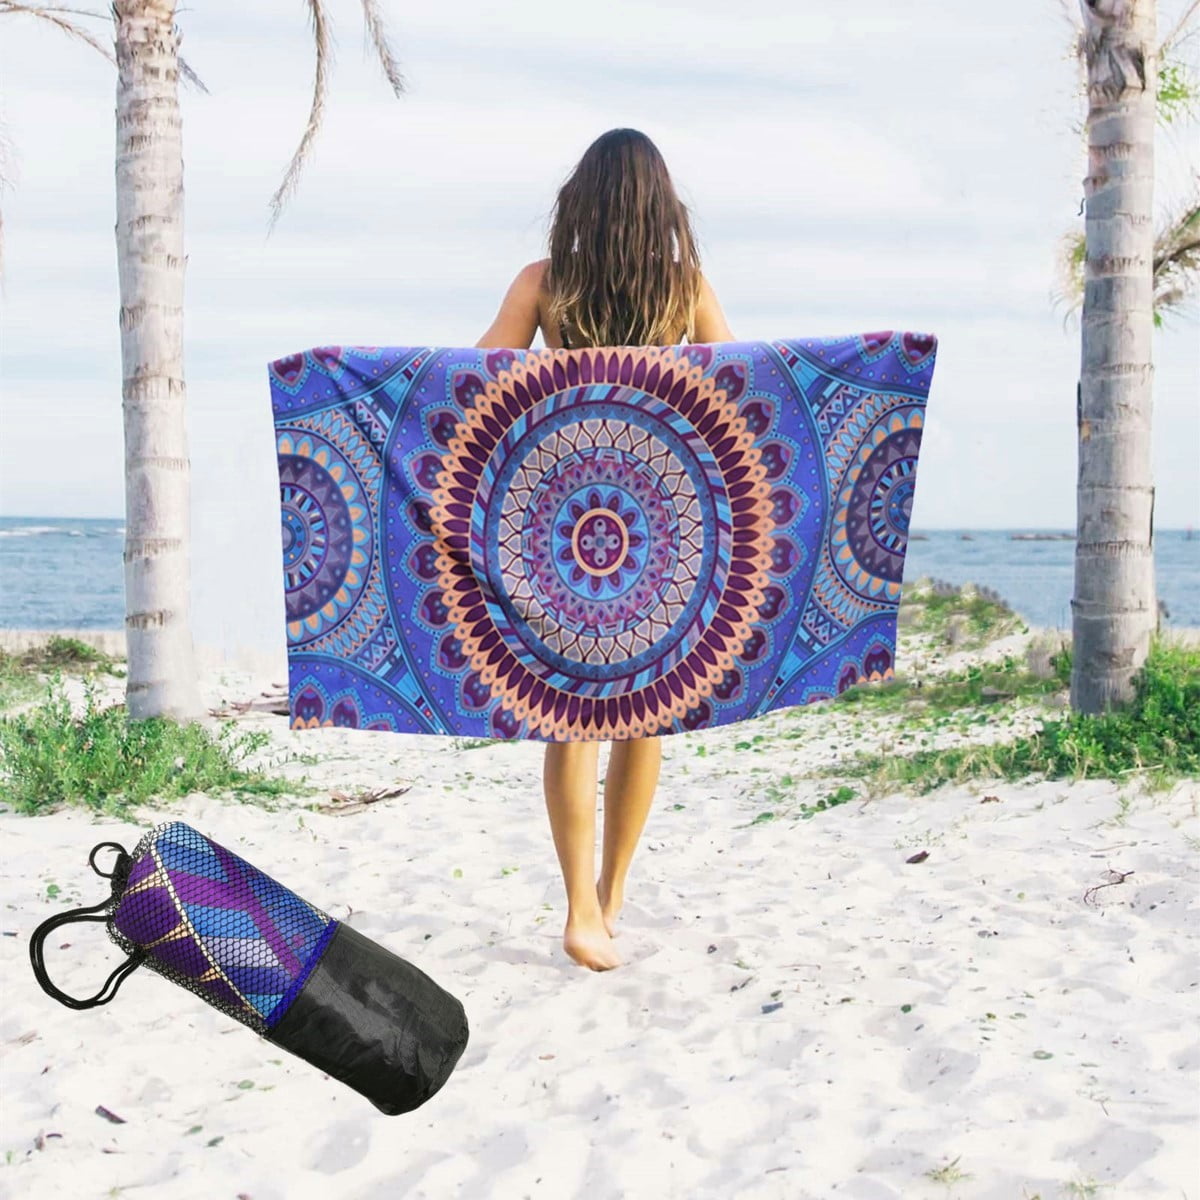 Sand Free Microfiber Beach Towel Lightweight Super Absorbent Personalized Pool Towels & Cabana Stripe Beach Towel 30”x60” Beach Towel Touchat Beach Towel Oversized 